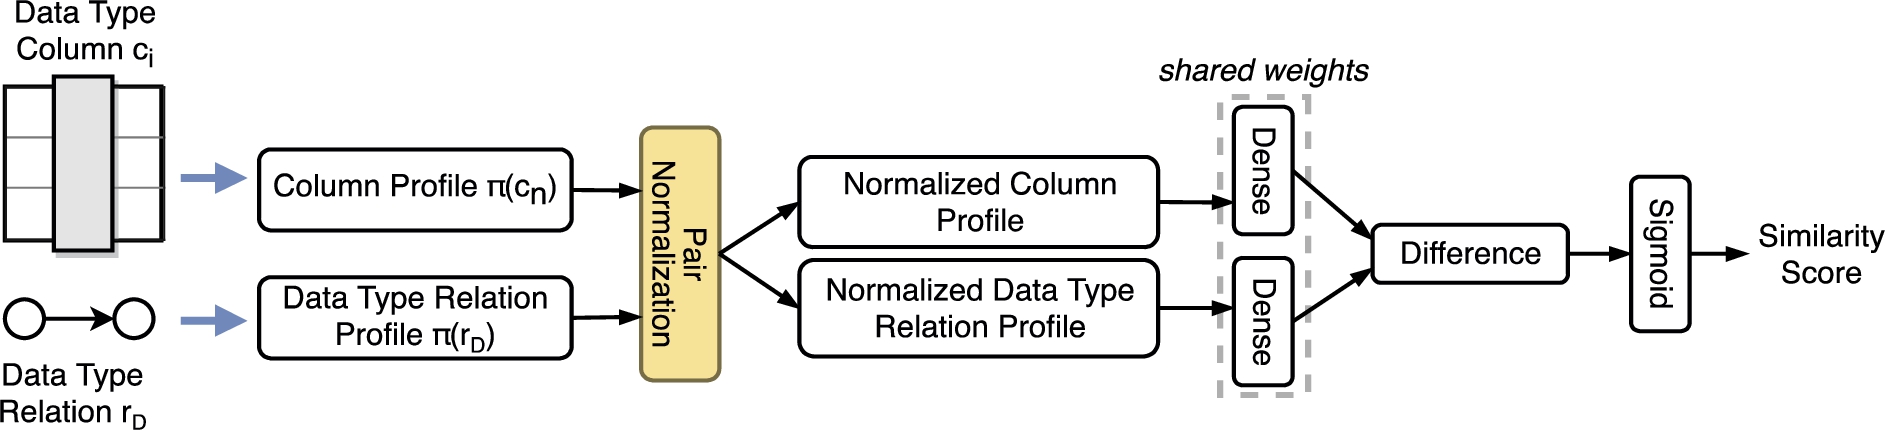 Architecture of the mapping function to predict the similarity between a column cn and a data type relation rD.